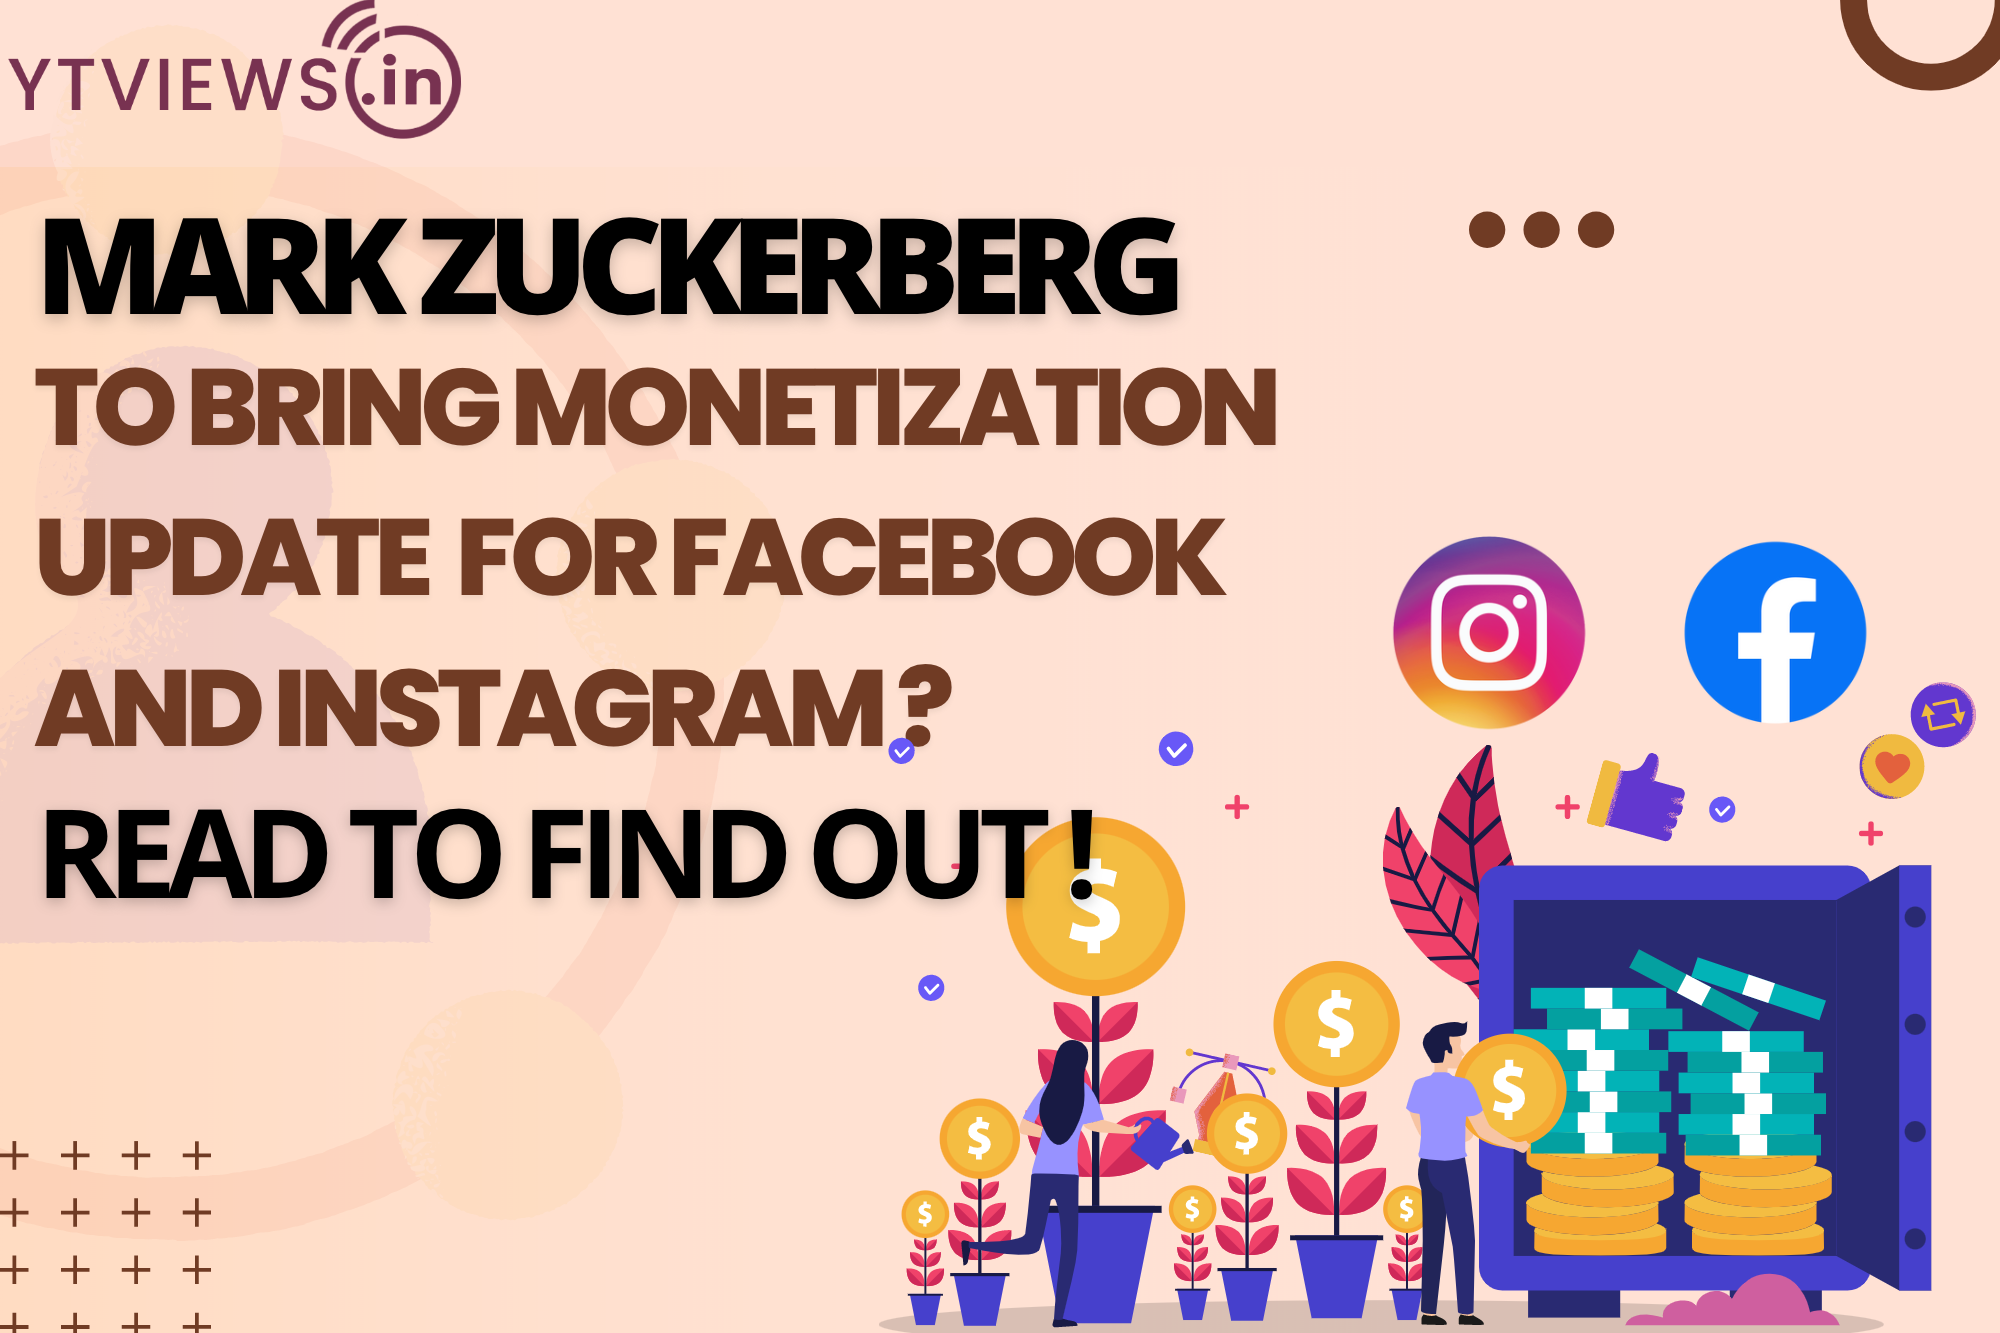 Mark Zuckerberg To Bring Monetization Update For Facebook and Instagram? Read To Find Out